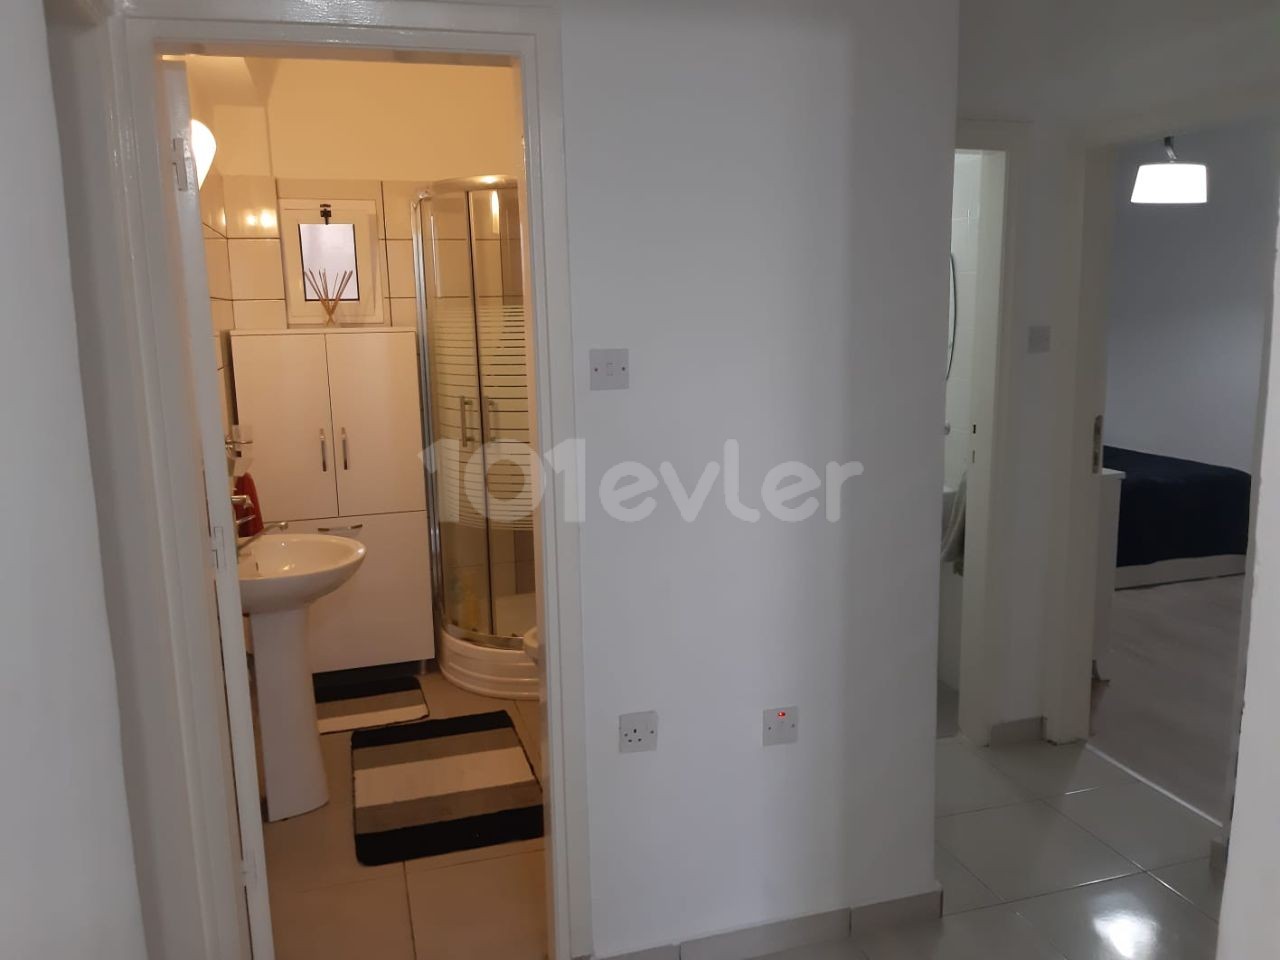 LARGE WELL-MAINTAINED 3 + 1 APARTMENT ON THE GROUND FLOOR NEAR THE FRONT SUPERMARKET IN THE CENTER OF FAMAGUSTA